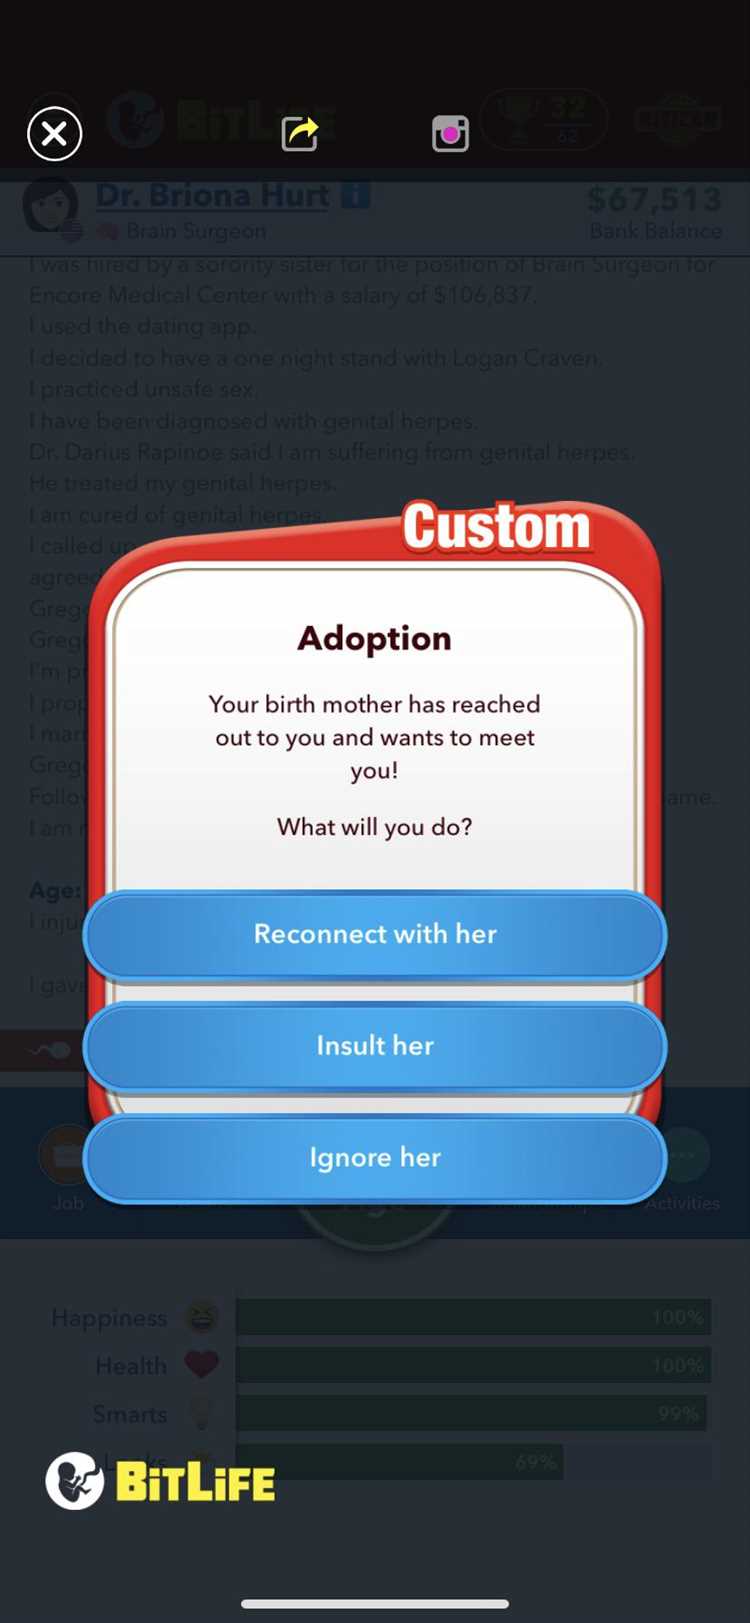 Adoption Process and Requirements